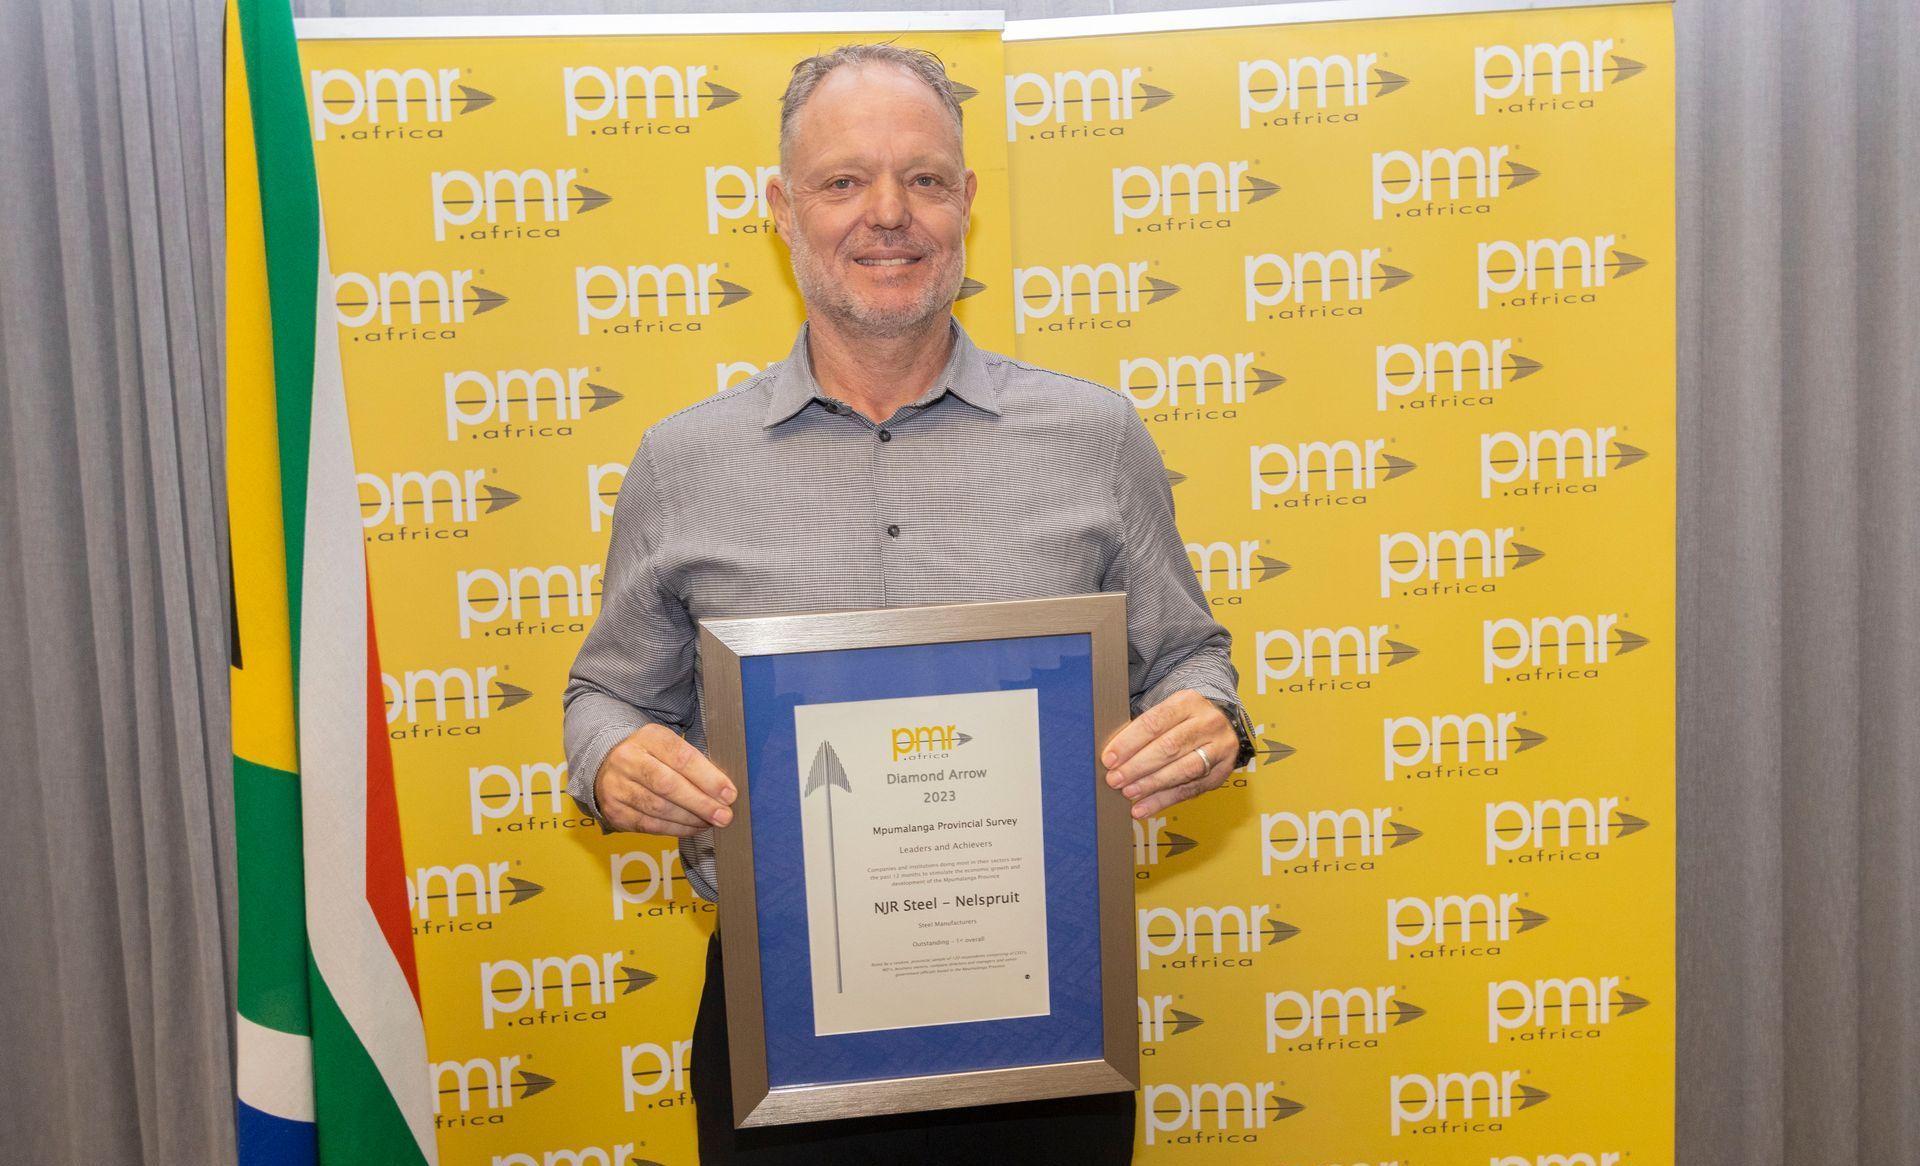 Andries de Kock, the Branch Manager of NJR Steel is holding a certificate in front of a yellow wall.